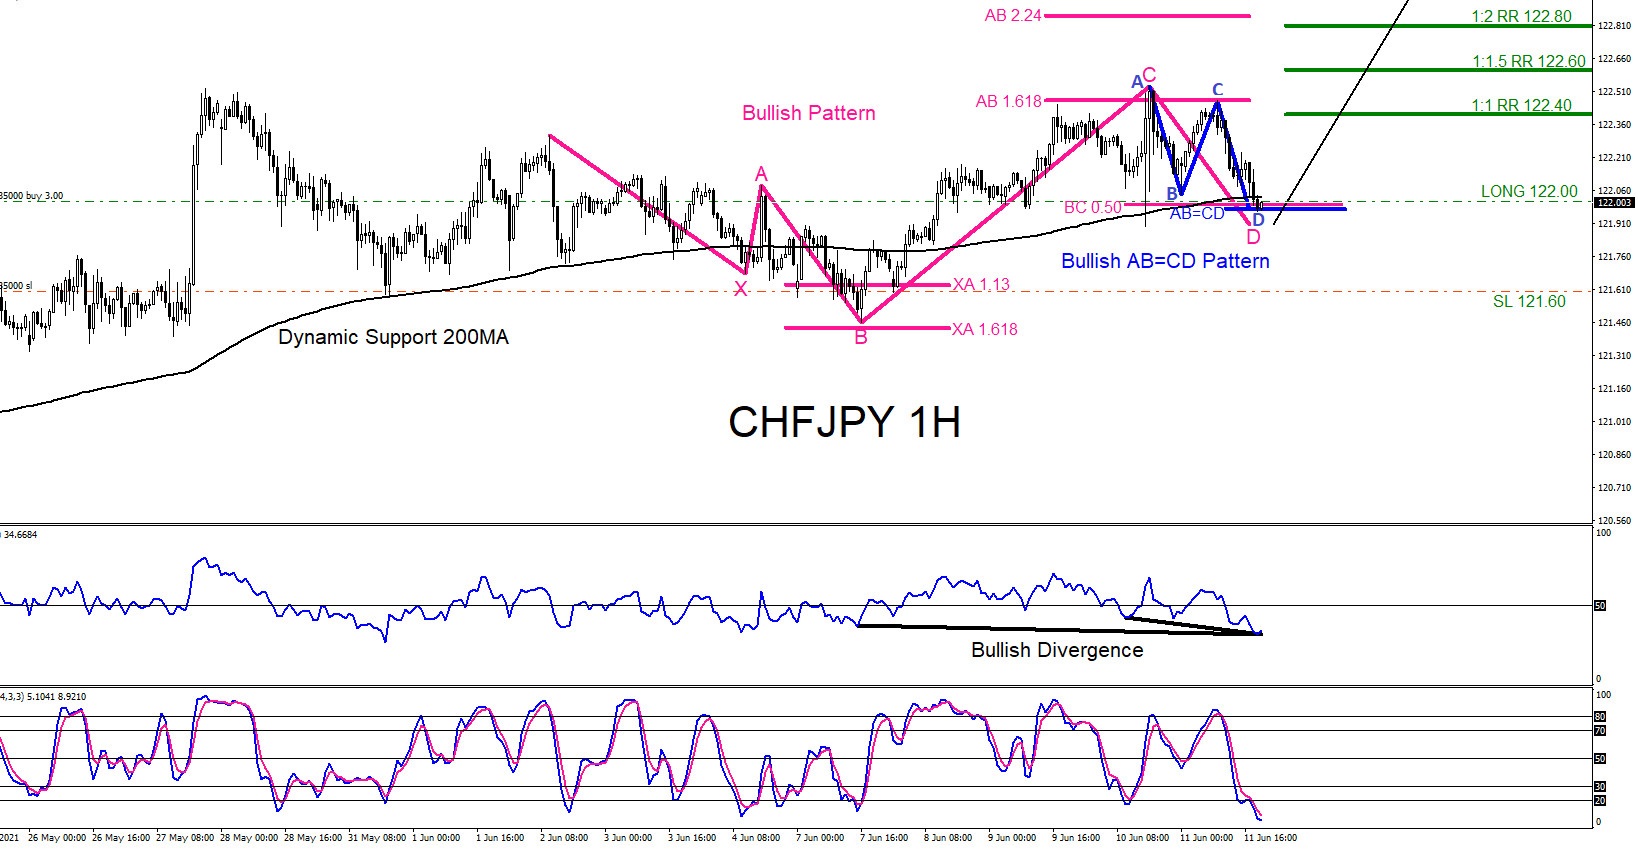 CHFJPY : Trade Setup for Another Possible Rally Higher